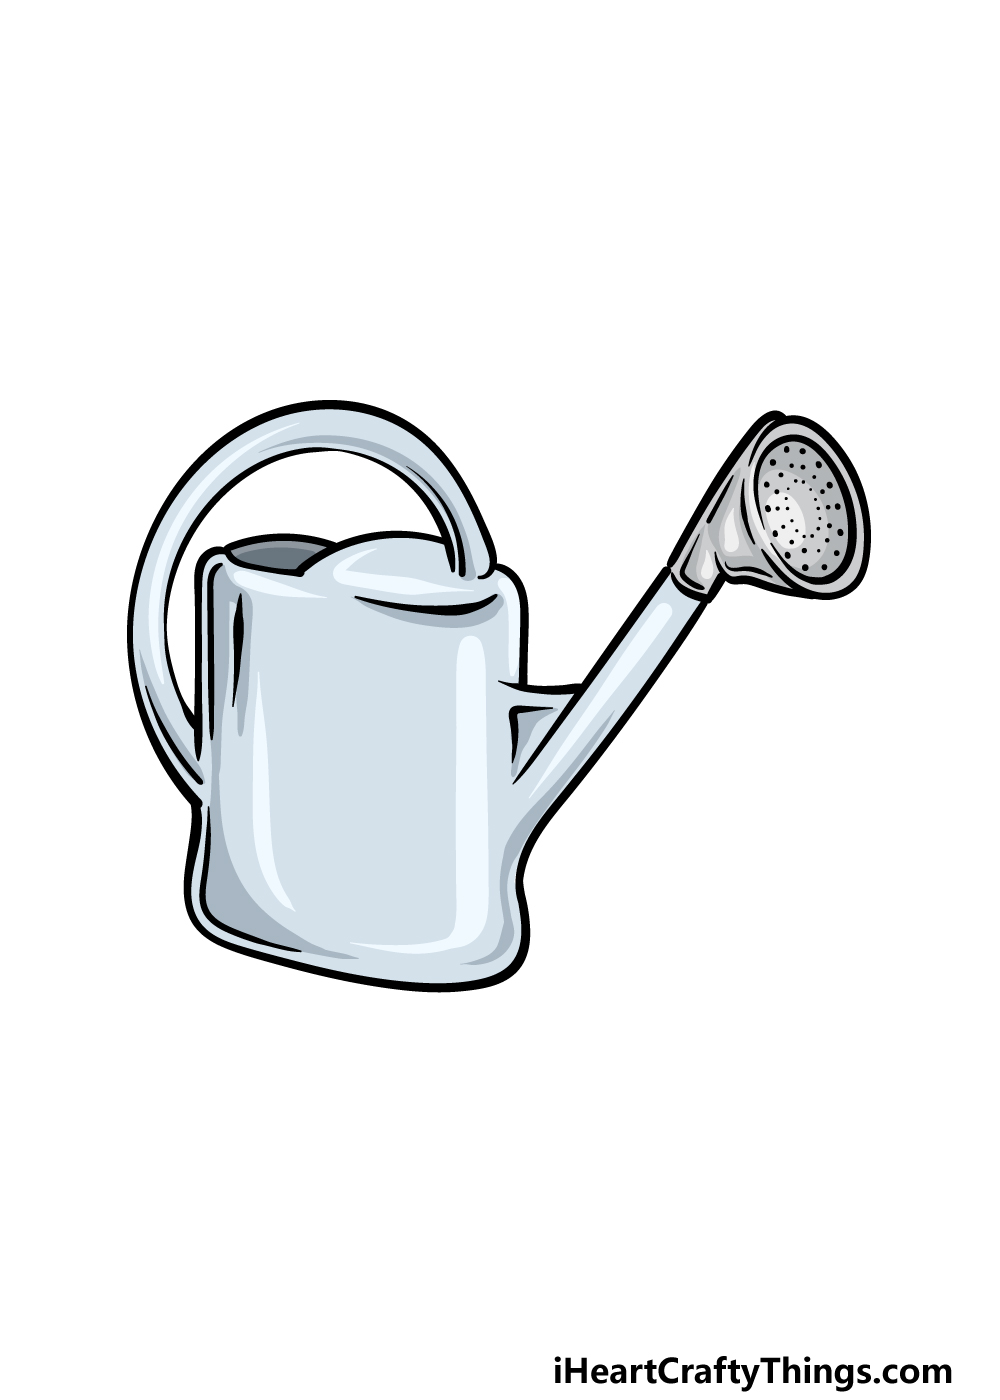 Watering Can Drawing - How To Draw A Watering Can Step By Step